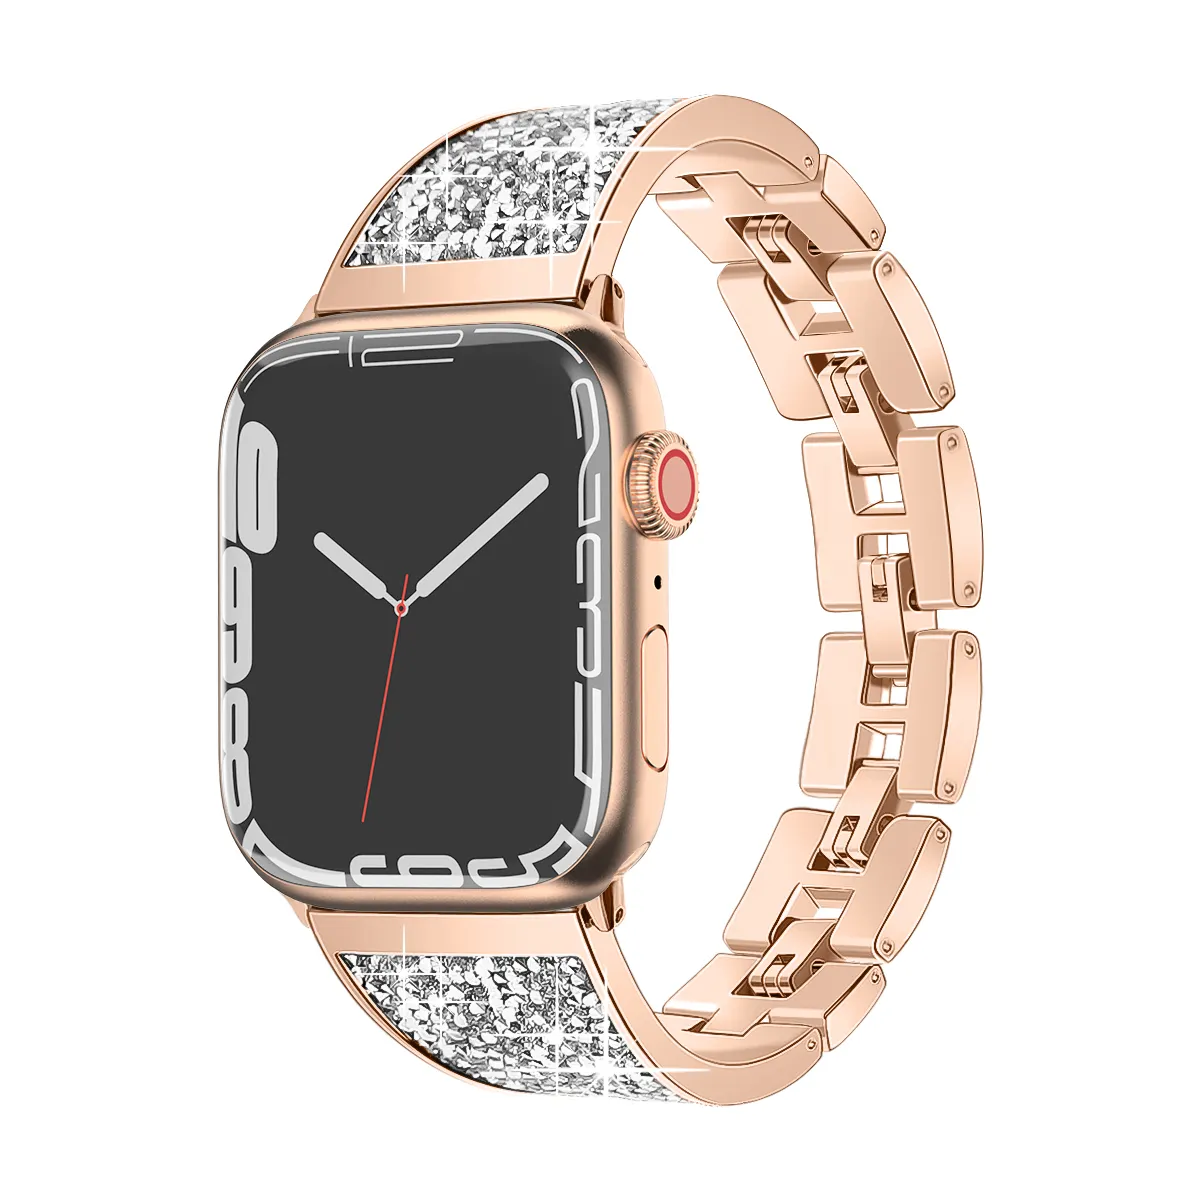 The unisex Apple Watch strap is laid-back and elegant, and it will prevail in Europe in 2022 for its multi-color and luxury